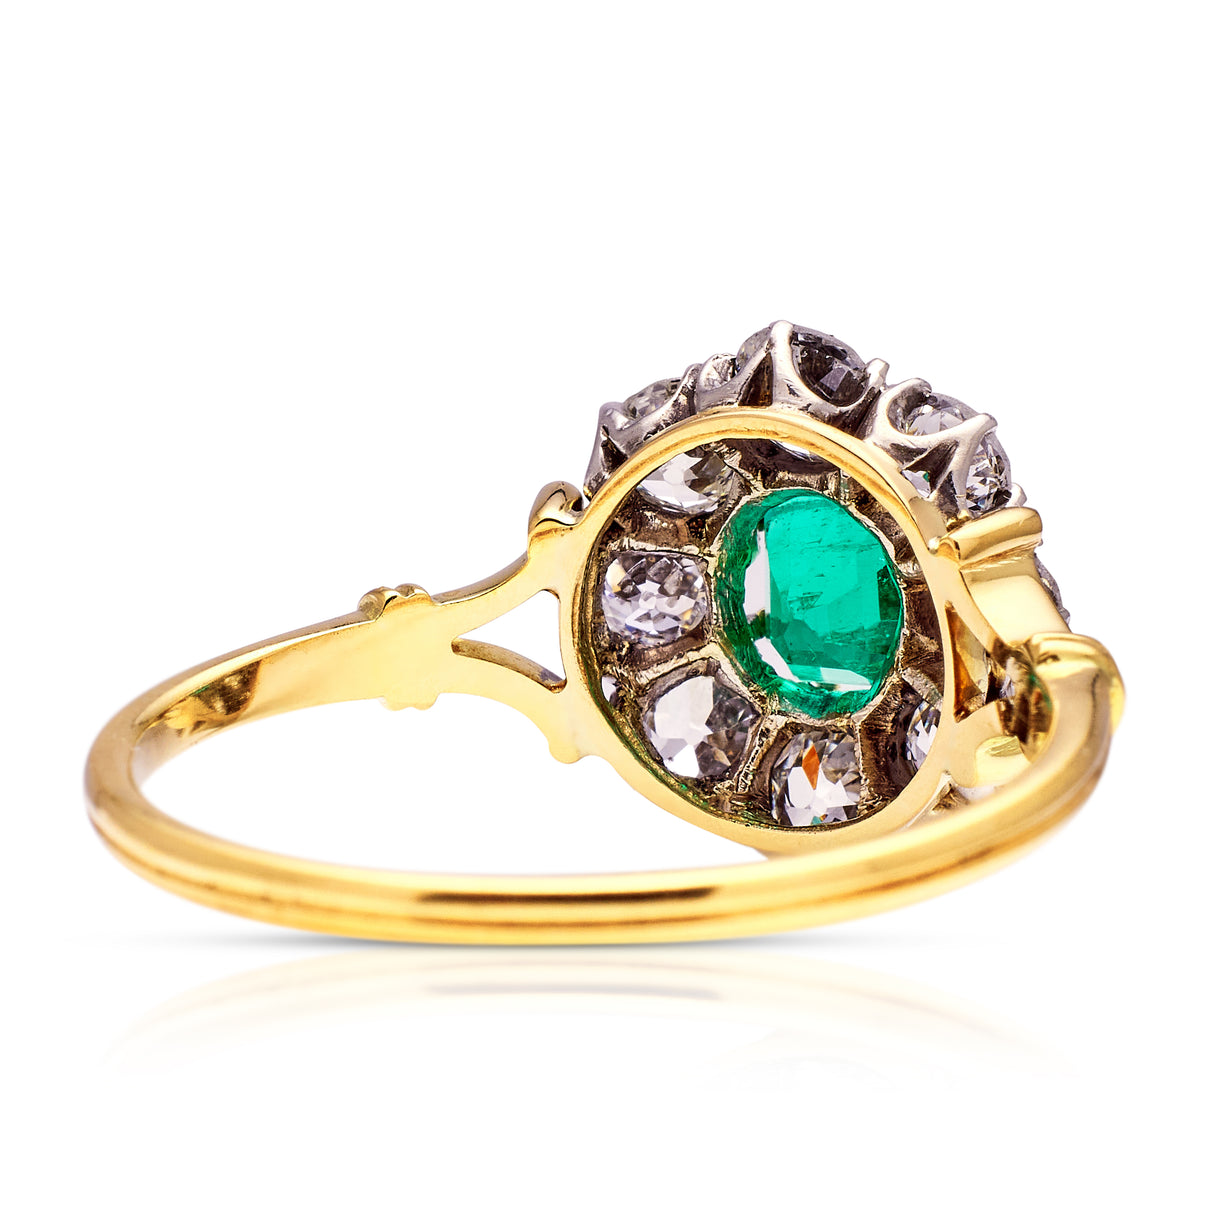 Antique, Edwardian emerald & diamond cluster ring, 18ct yellow gold